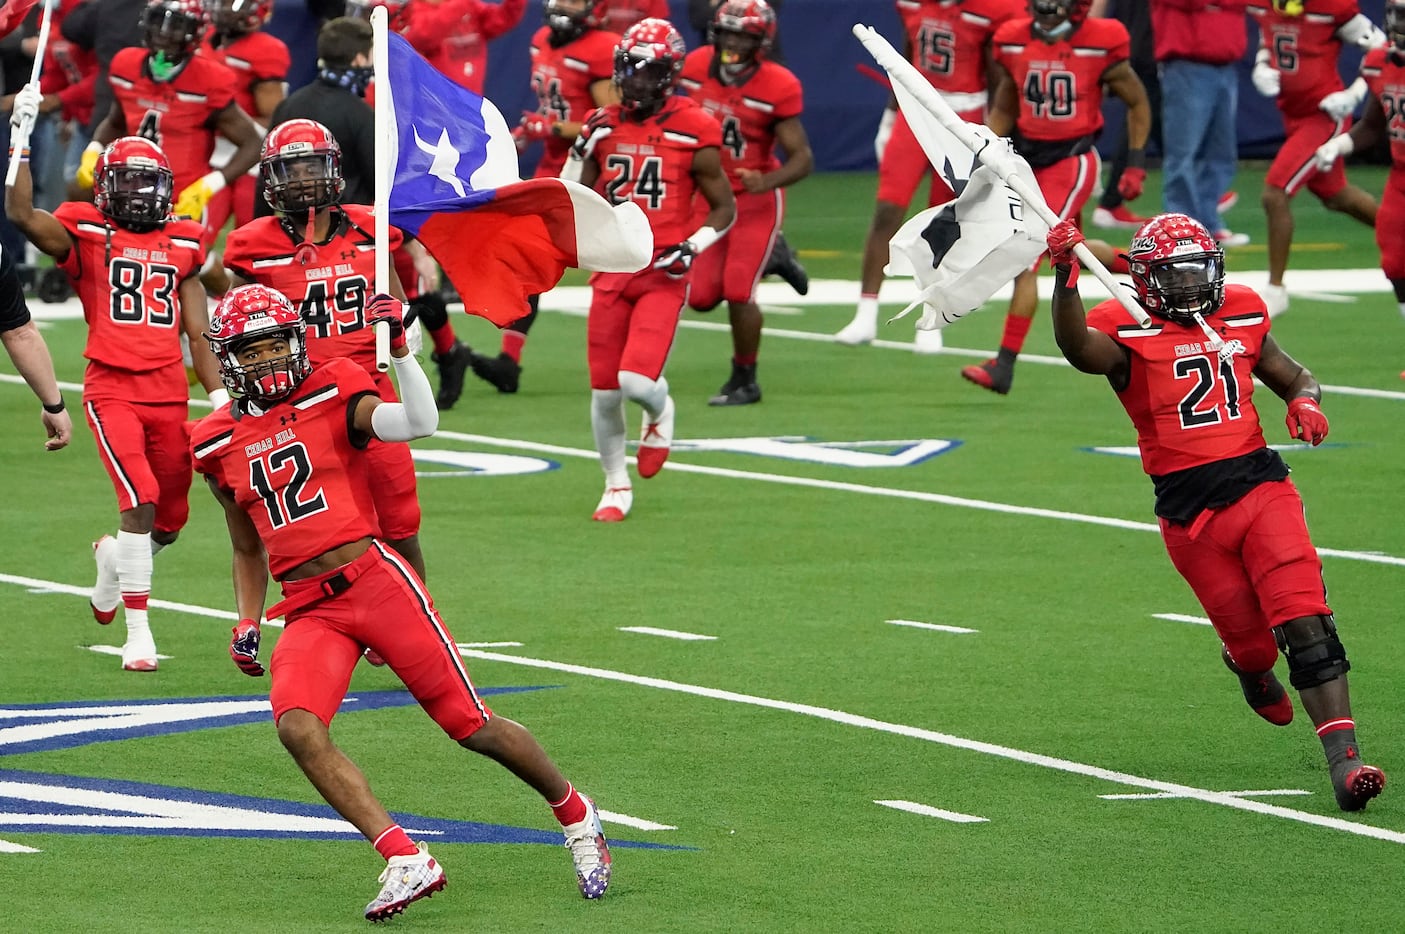 Cedar Hill’s Brian Rainey (12) and Kris Allen (21) carry flags as they lead their team on to...